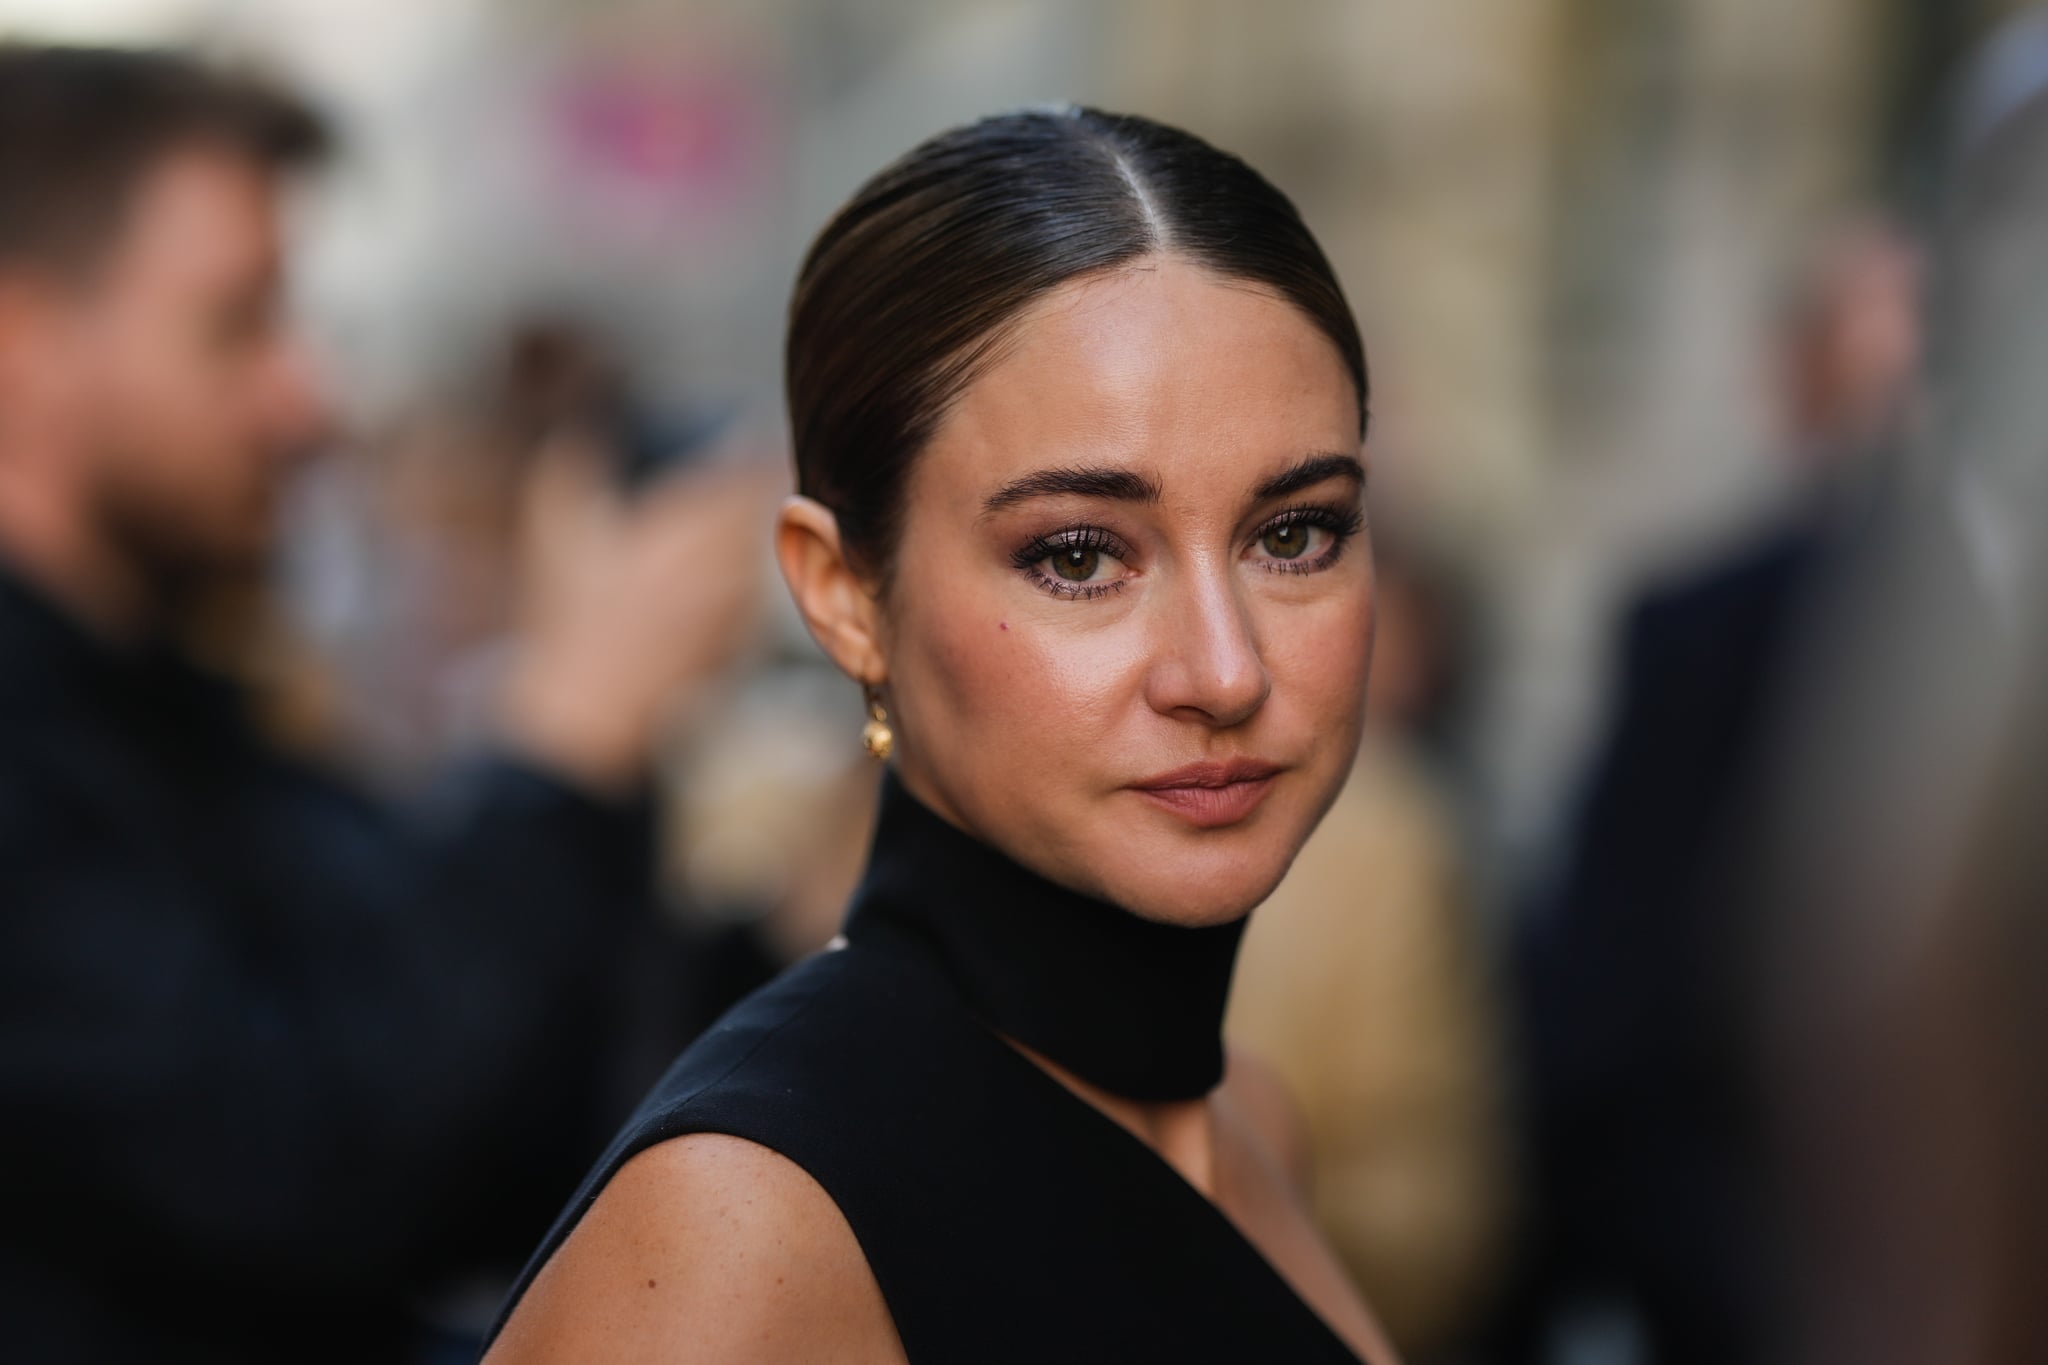 Shailene Woodley Opens Up About Her Split From Aaron Rodgers